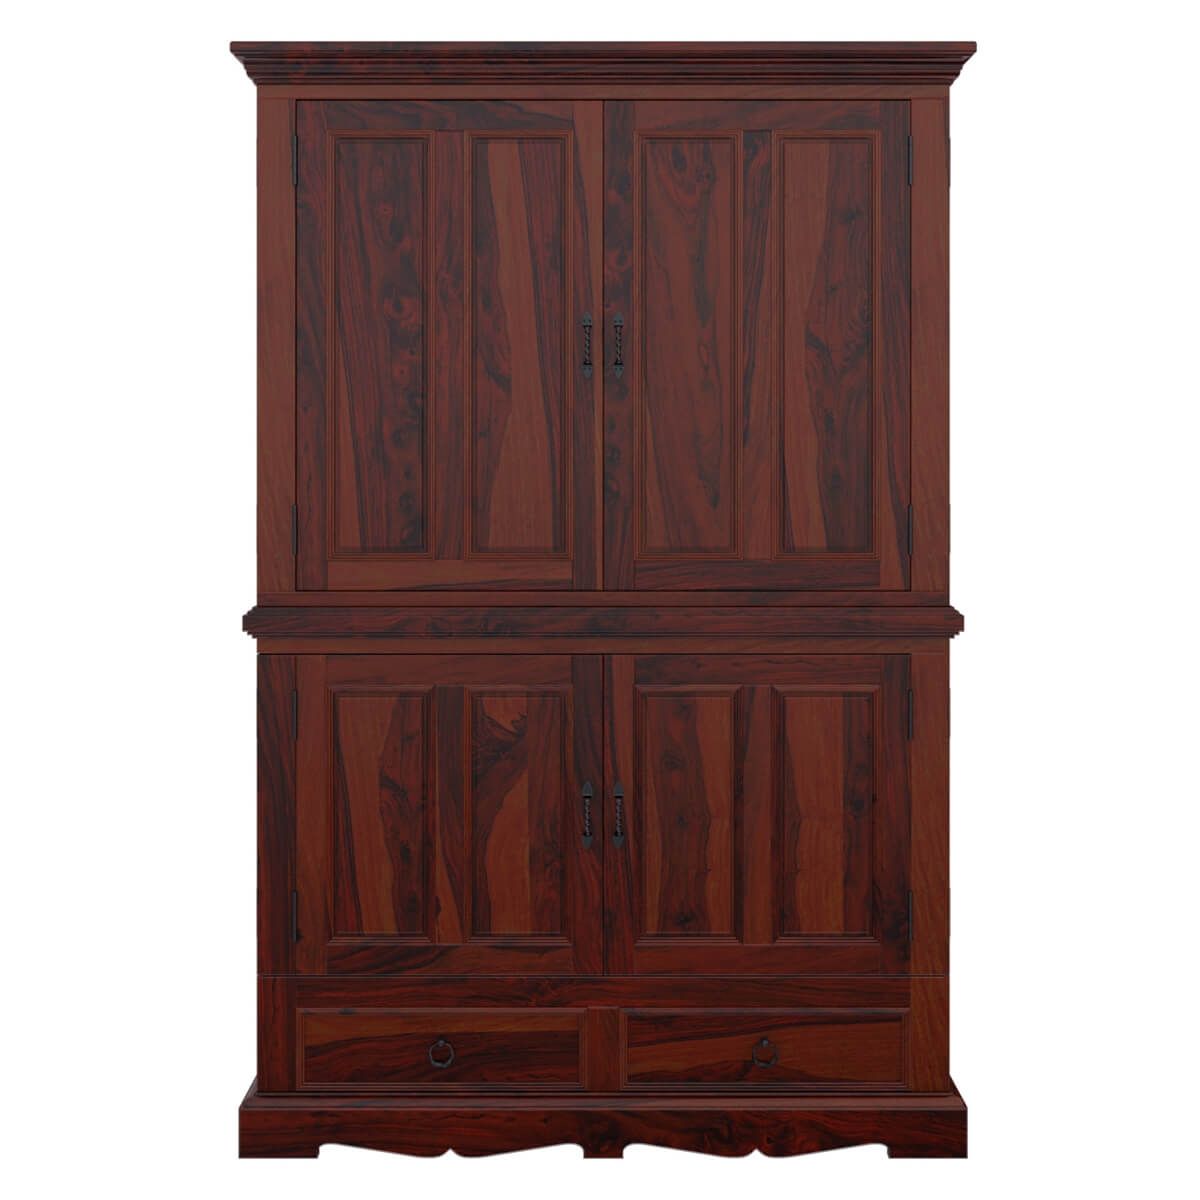 Avon 4 Door Large Solid Wood Media Tv Armoire With Drawers With Regard To Wood Tv Armoire (View 9 of 15)